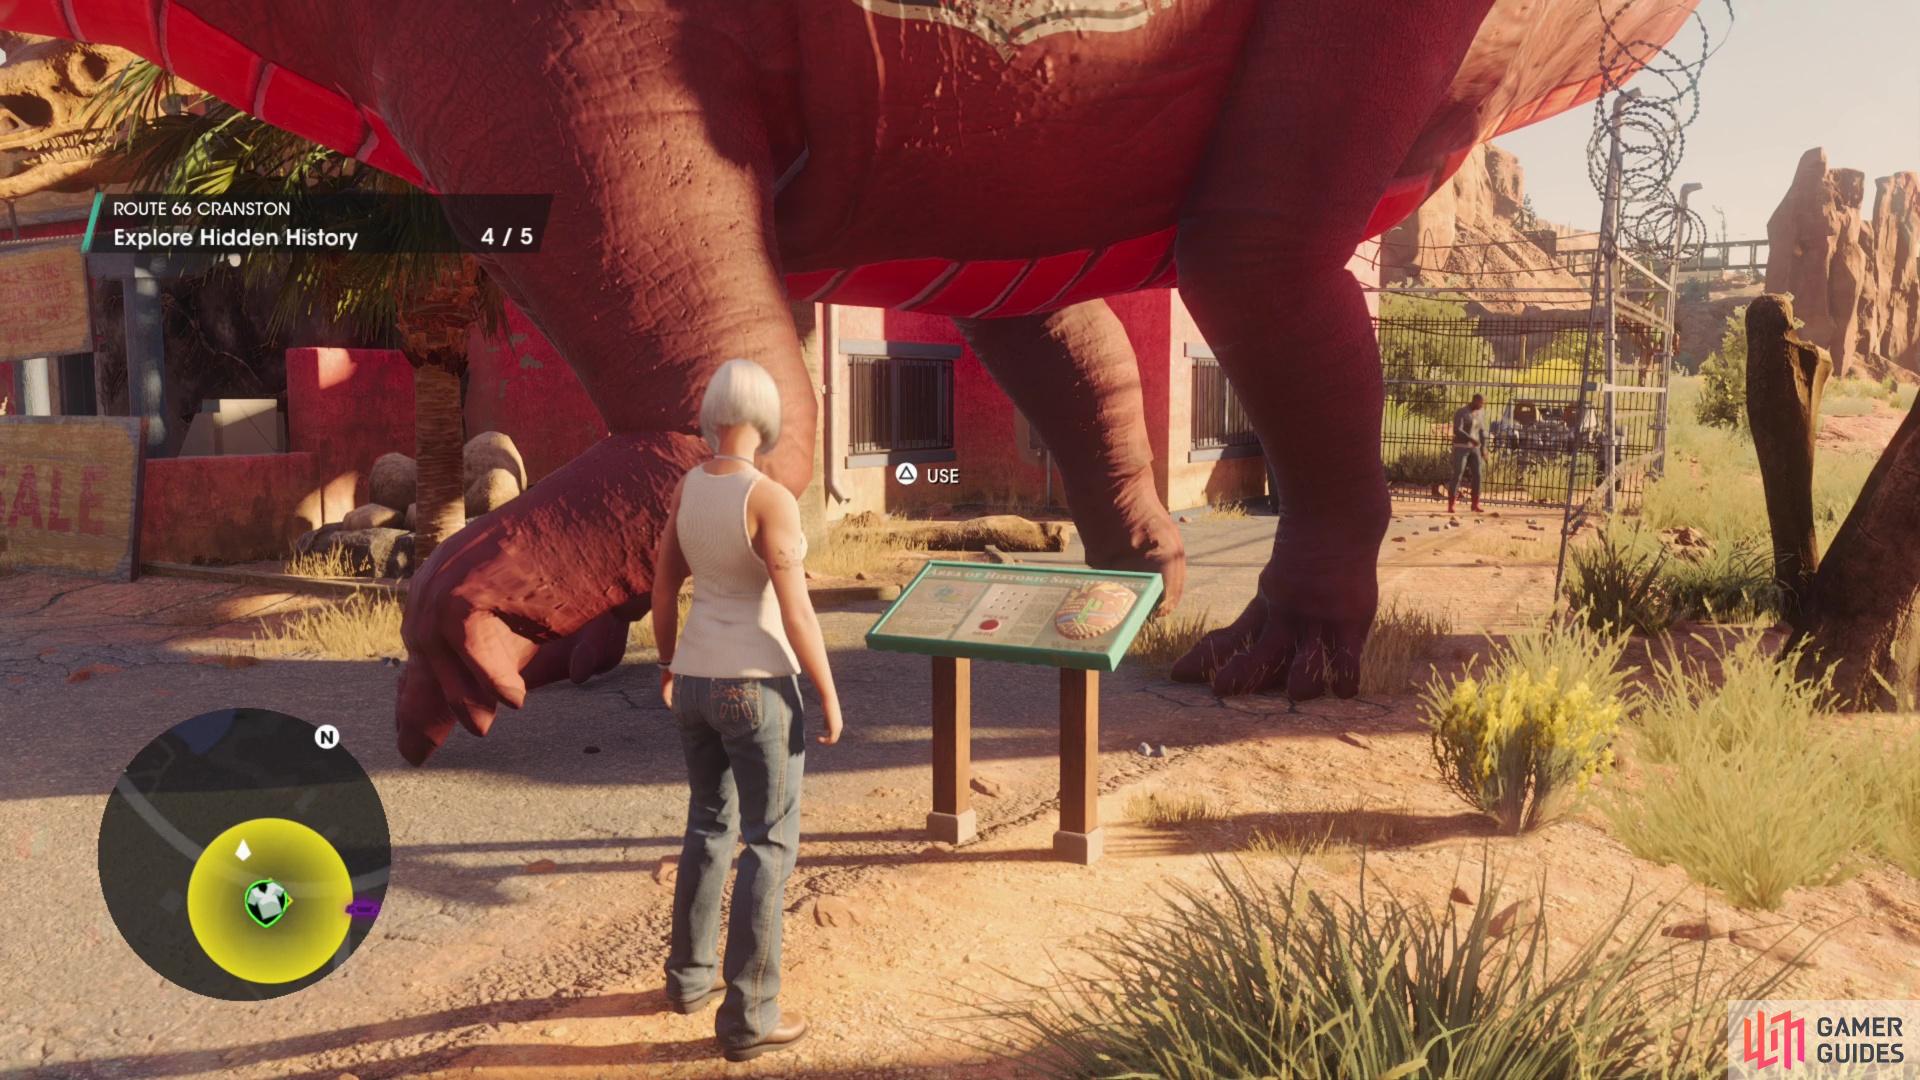 the third sign can be found in front of a red sauropod near the "Kavanagh County Rock Shop",